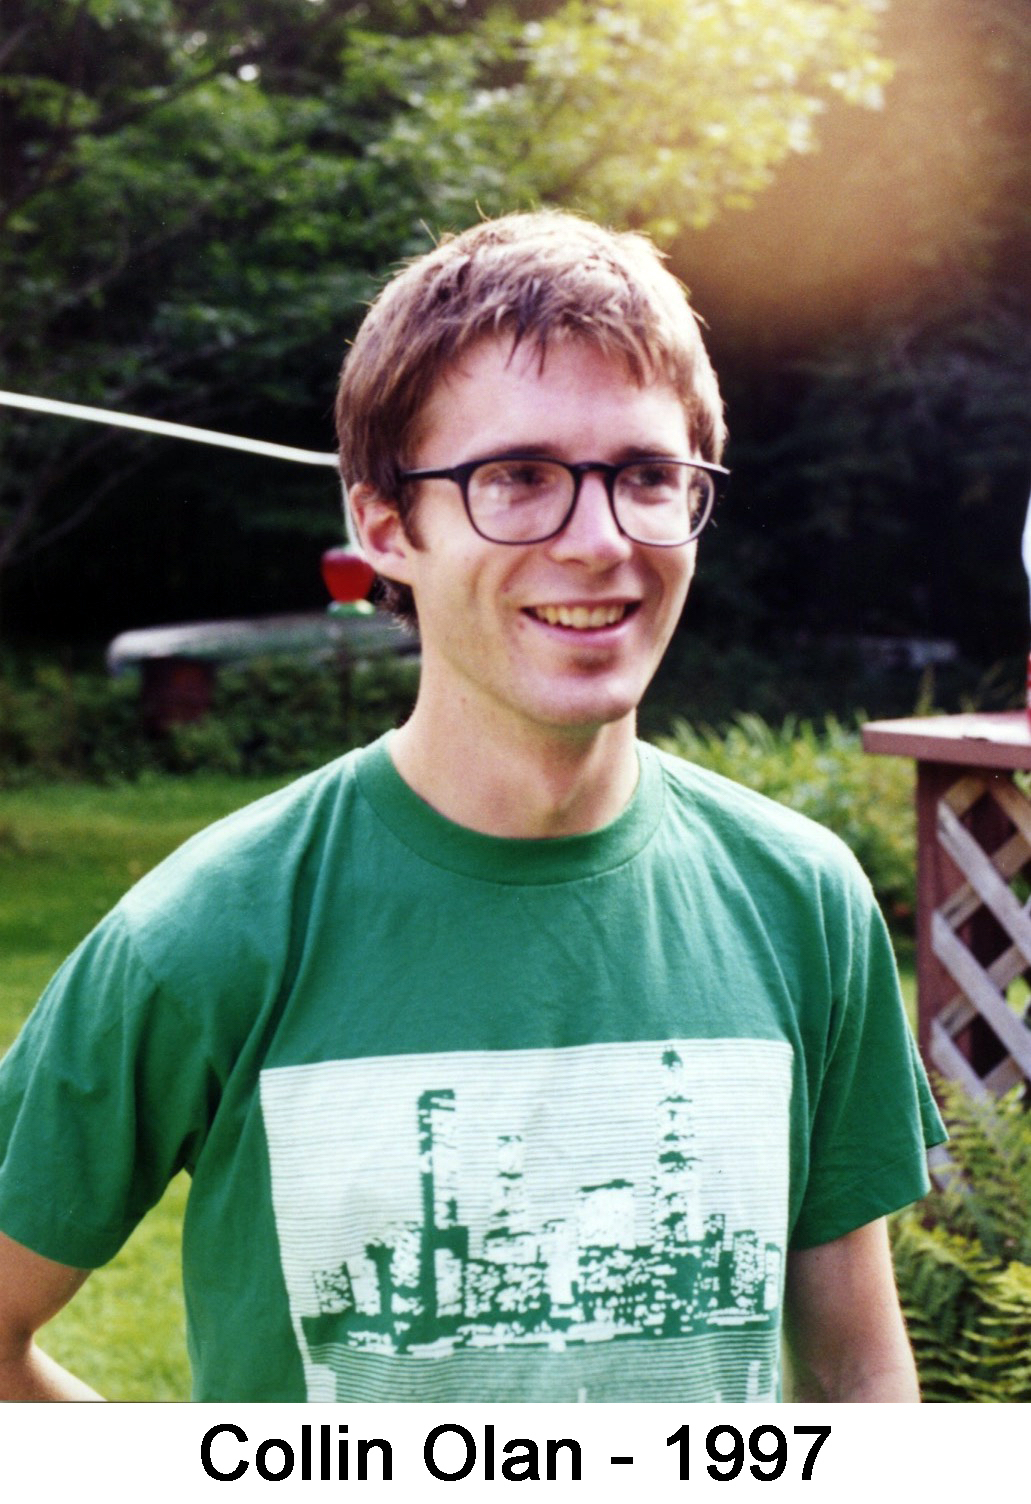 He is smiling and wearing glasses and a green T-shirt.